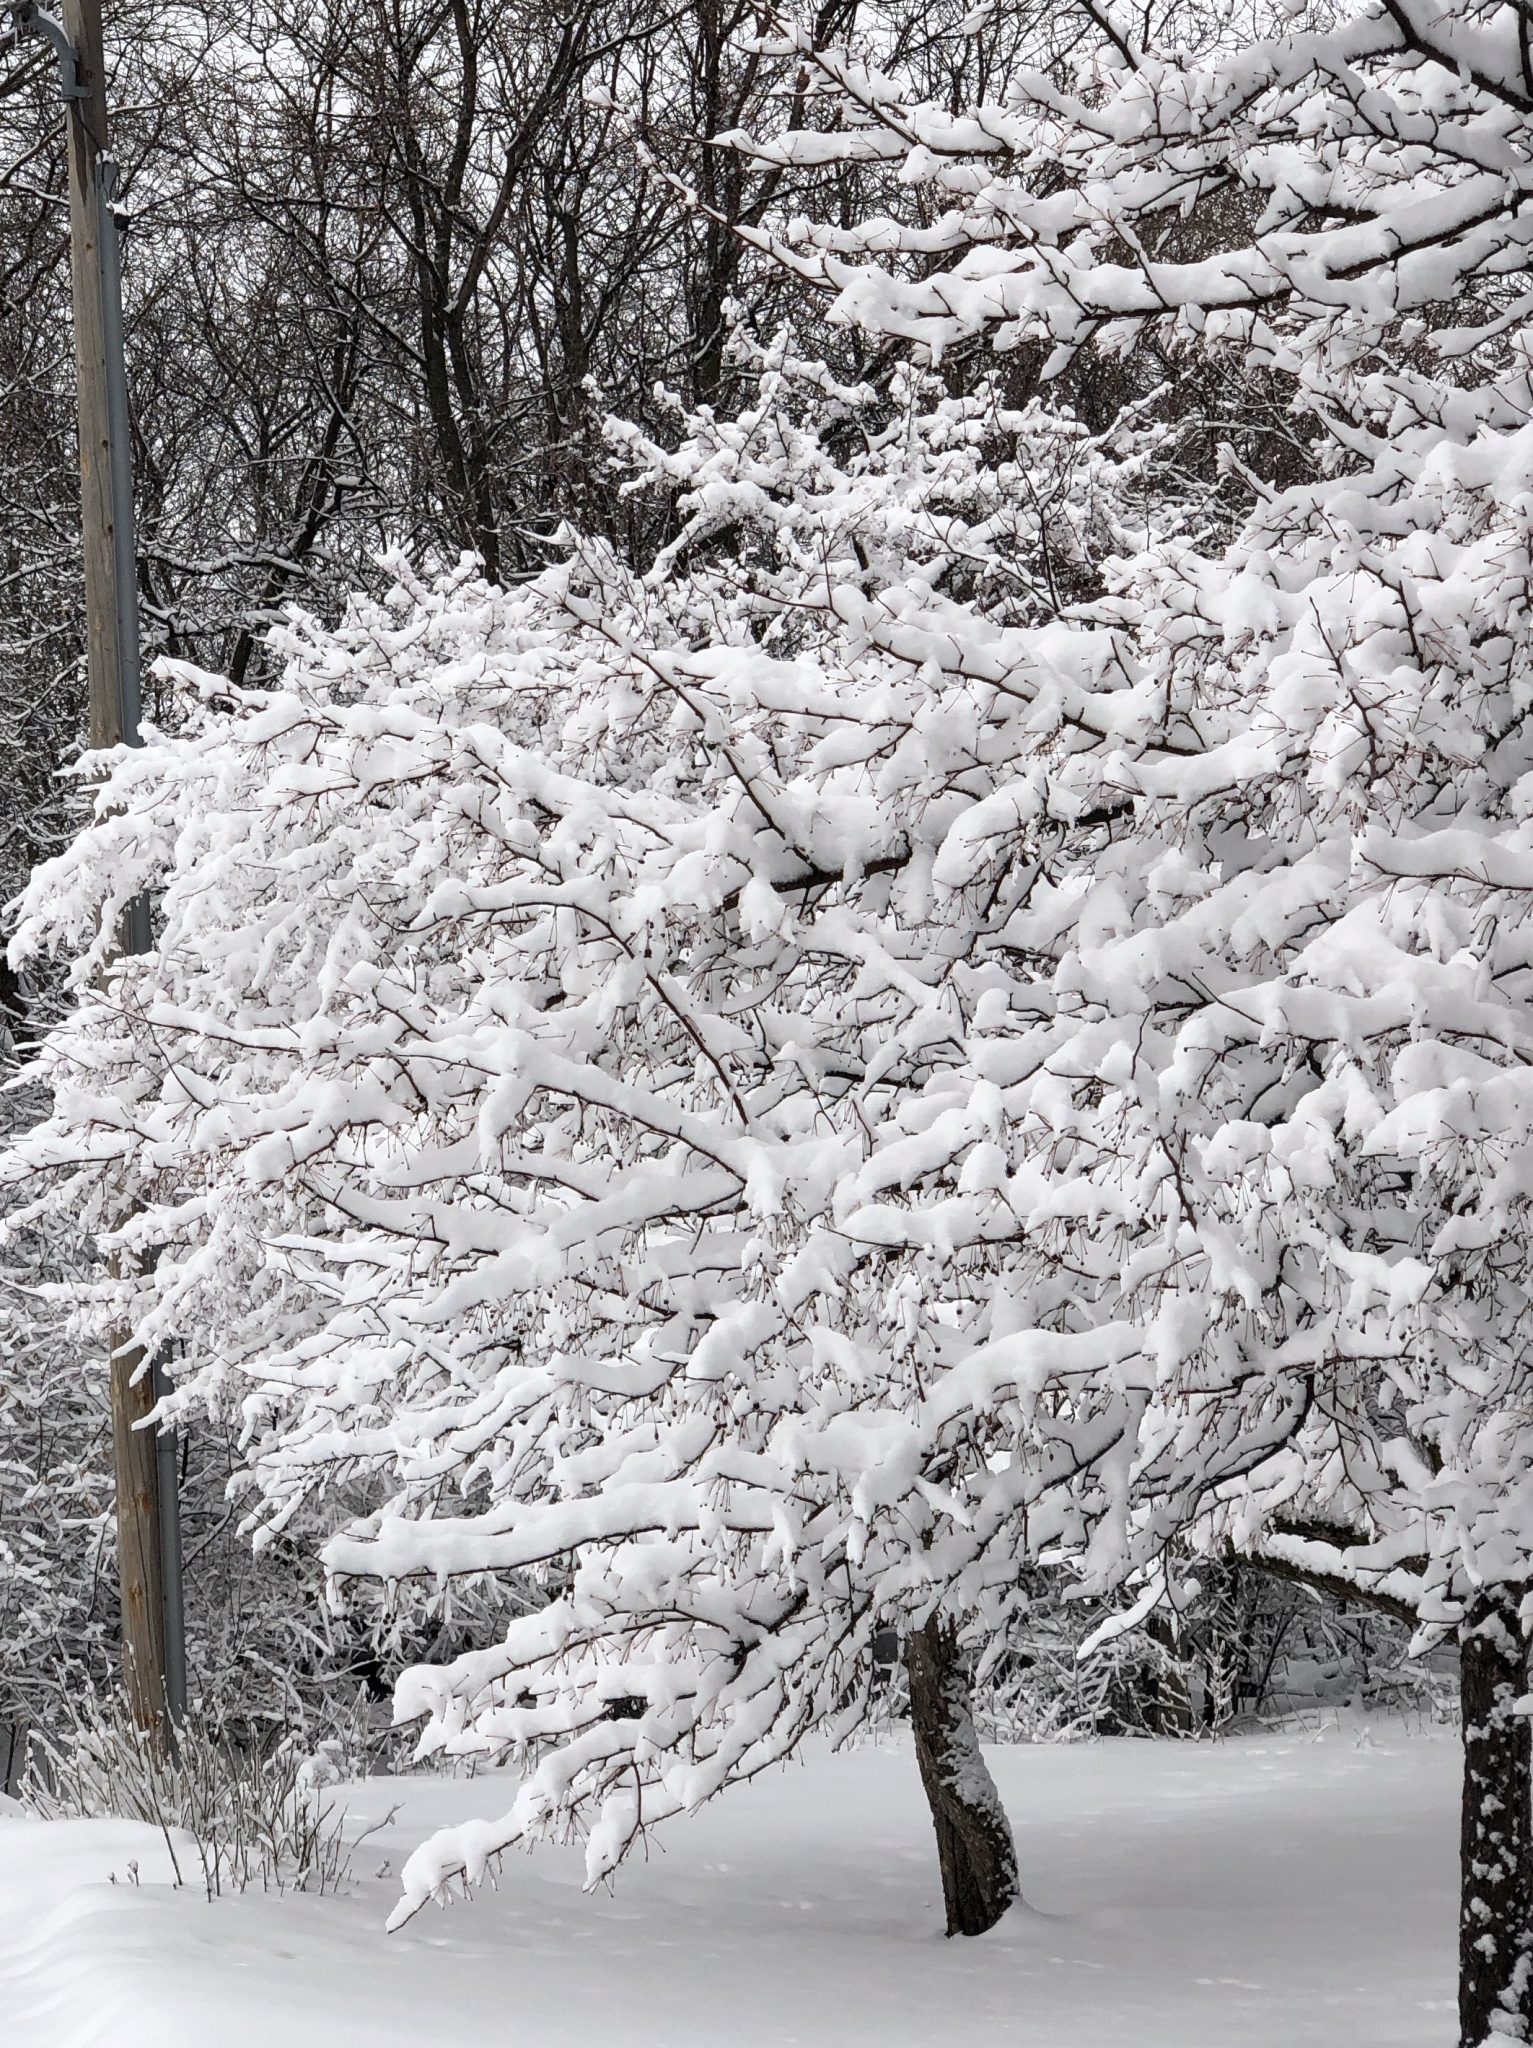 Closeup view of a icy-snow covered tree